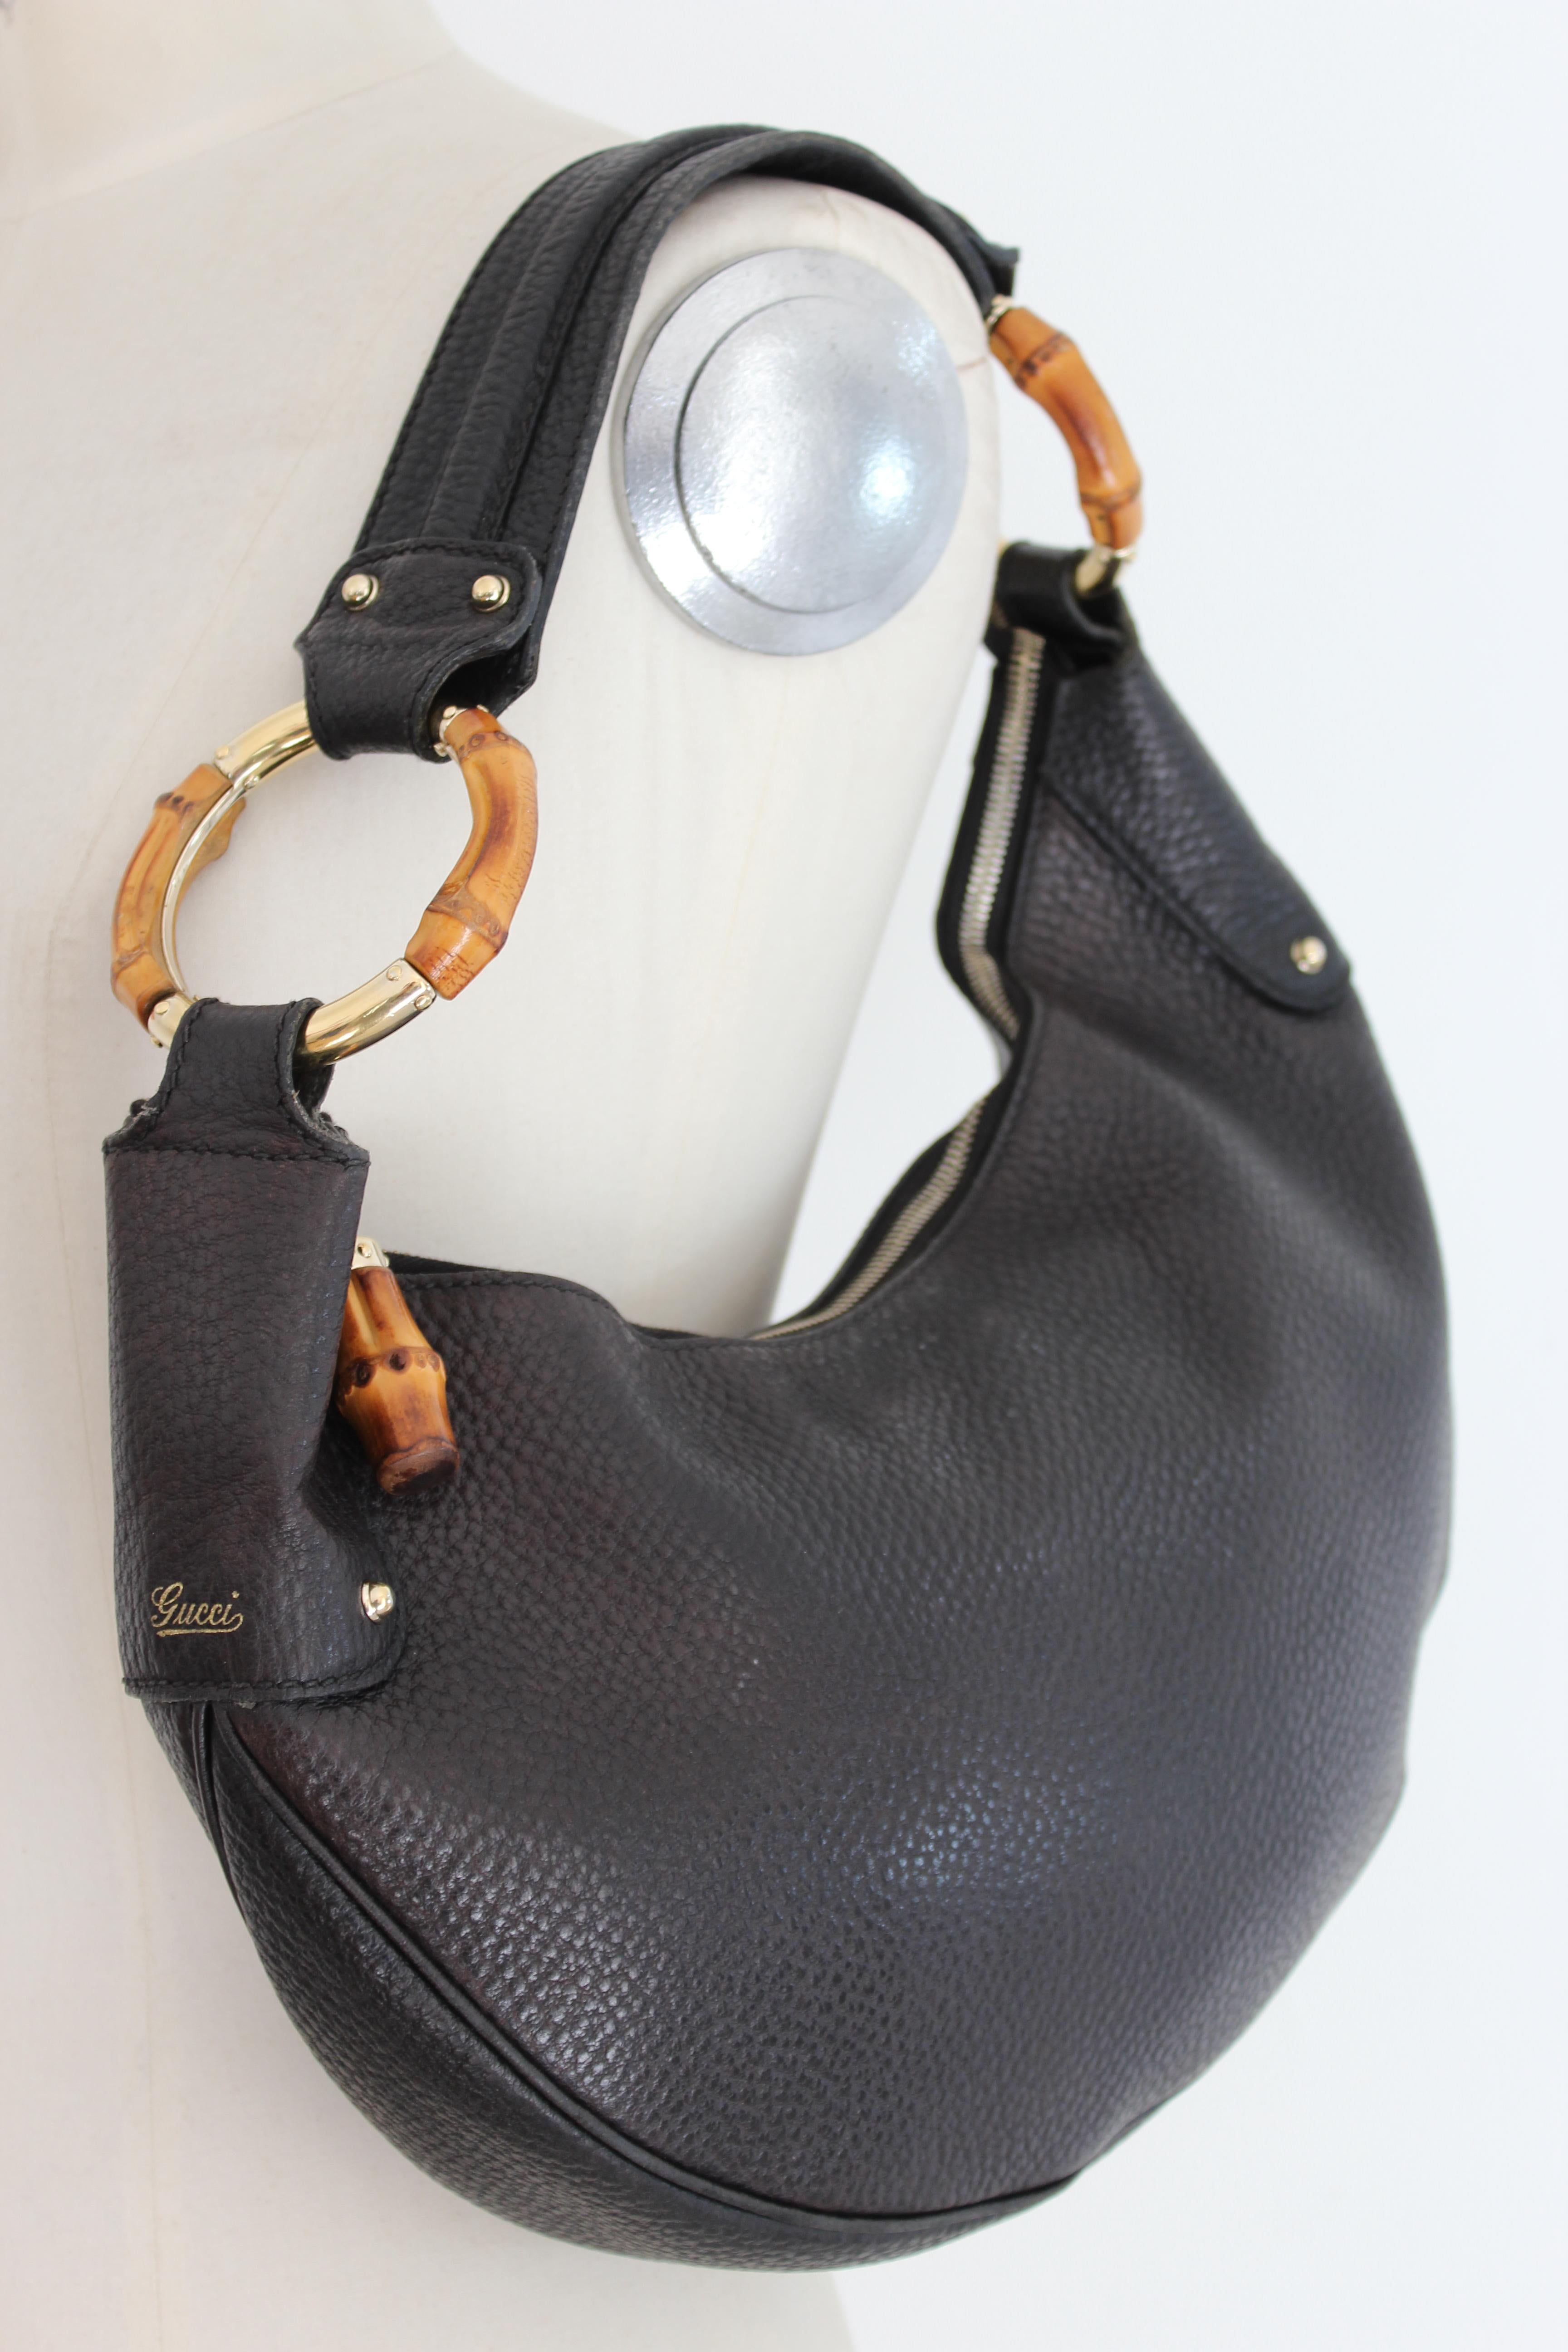 Gucci black leather hobo bag, half-moon shape. In fine hammered leather with bamboo inserts. The shoulder bag ideal for the evening or for free time, large and elegant. Authentic. Excellent conditions. 

Model number: 137577 205011

Length: 21